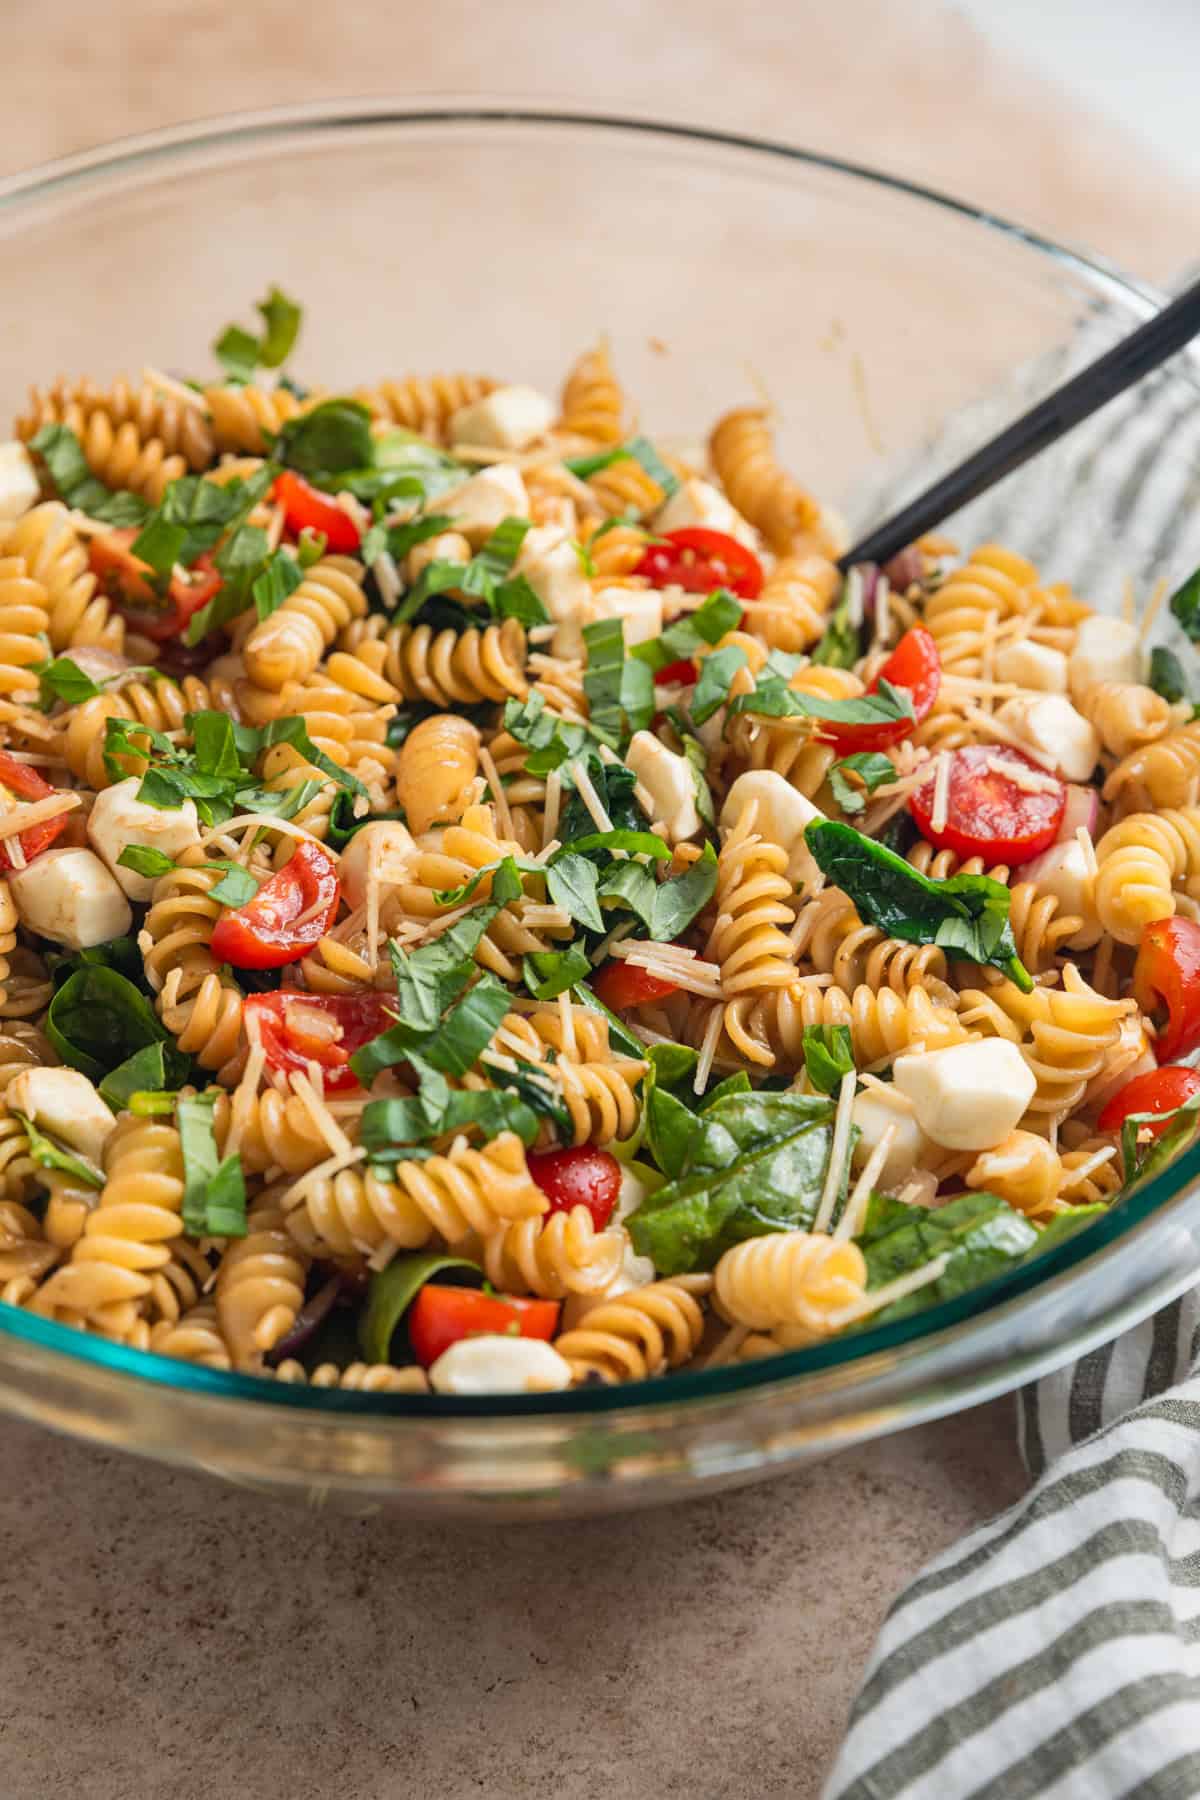 Prepped pasta salad with basil, tomatoes, mozzarella, spinach and other ingredients in bowl.